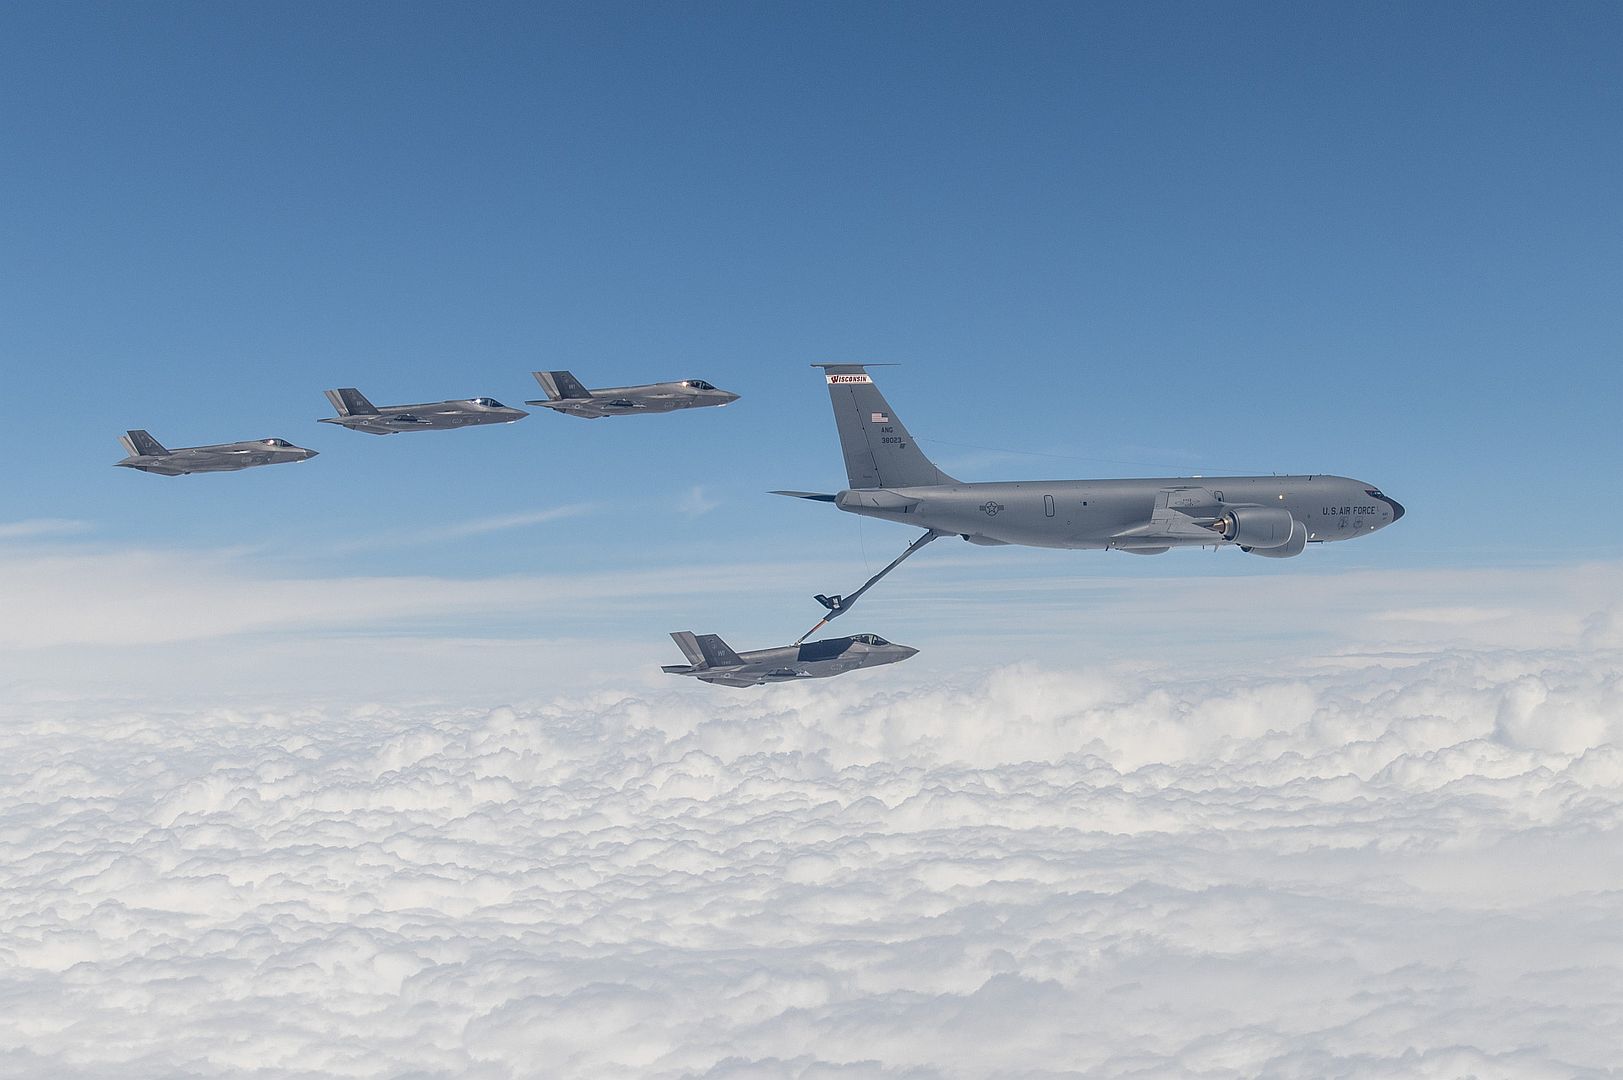 135 Stratotanker Assigned To The 128th Air Refueling Wing In Milwaukee